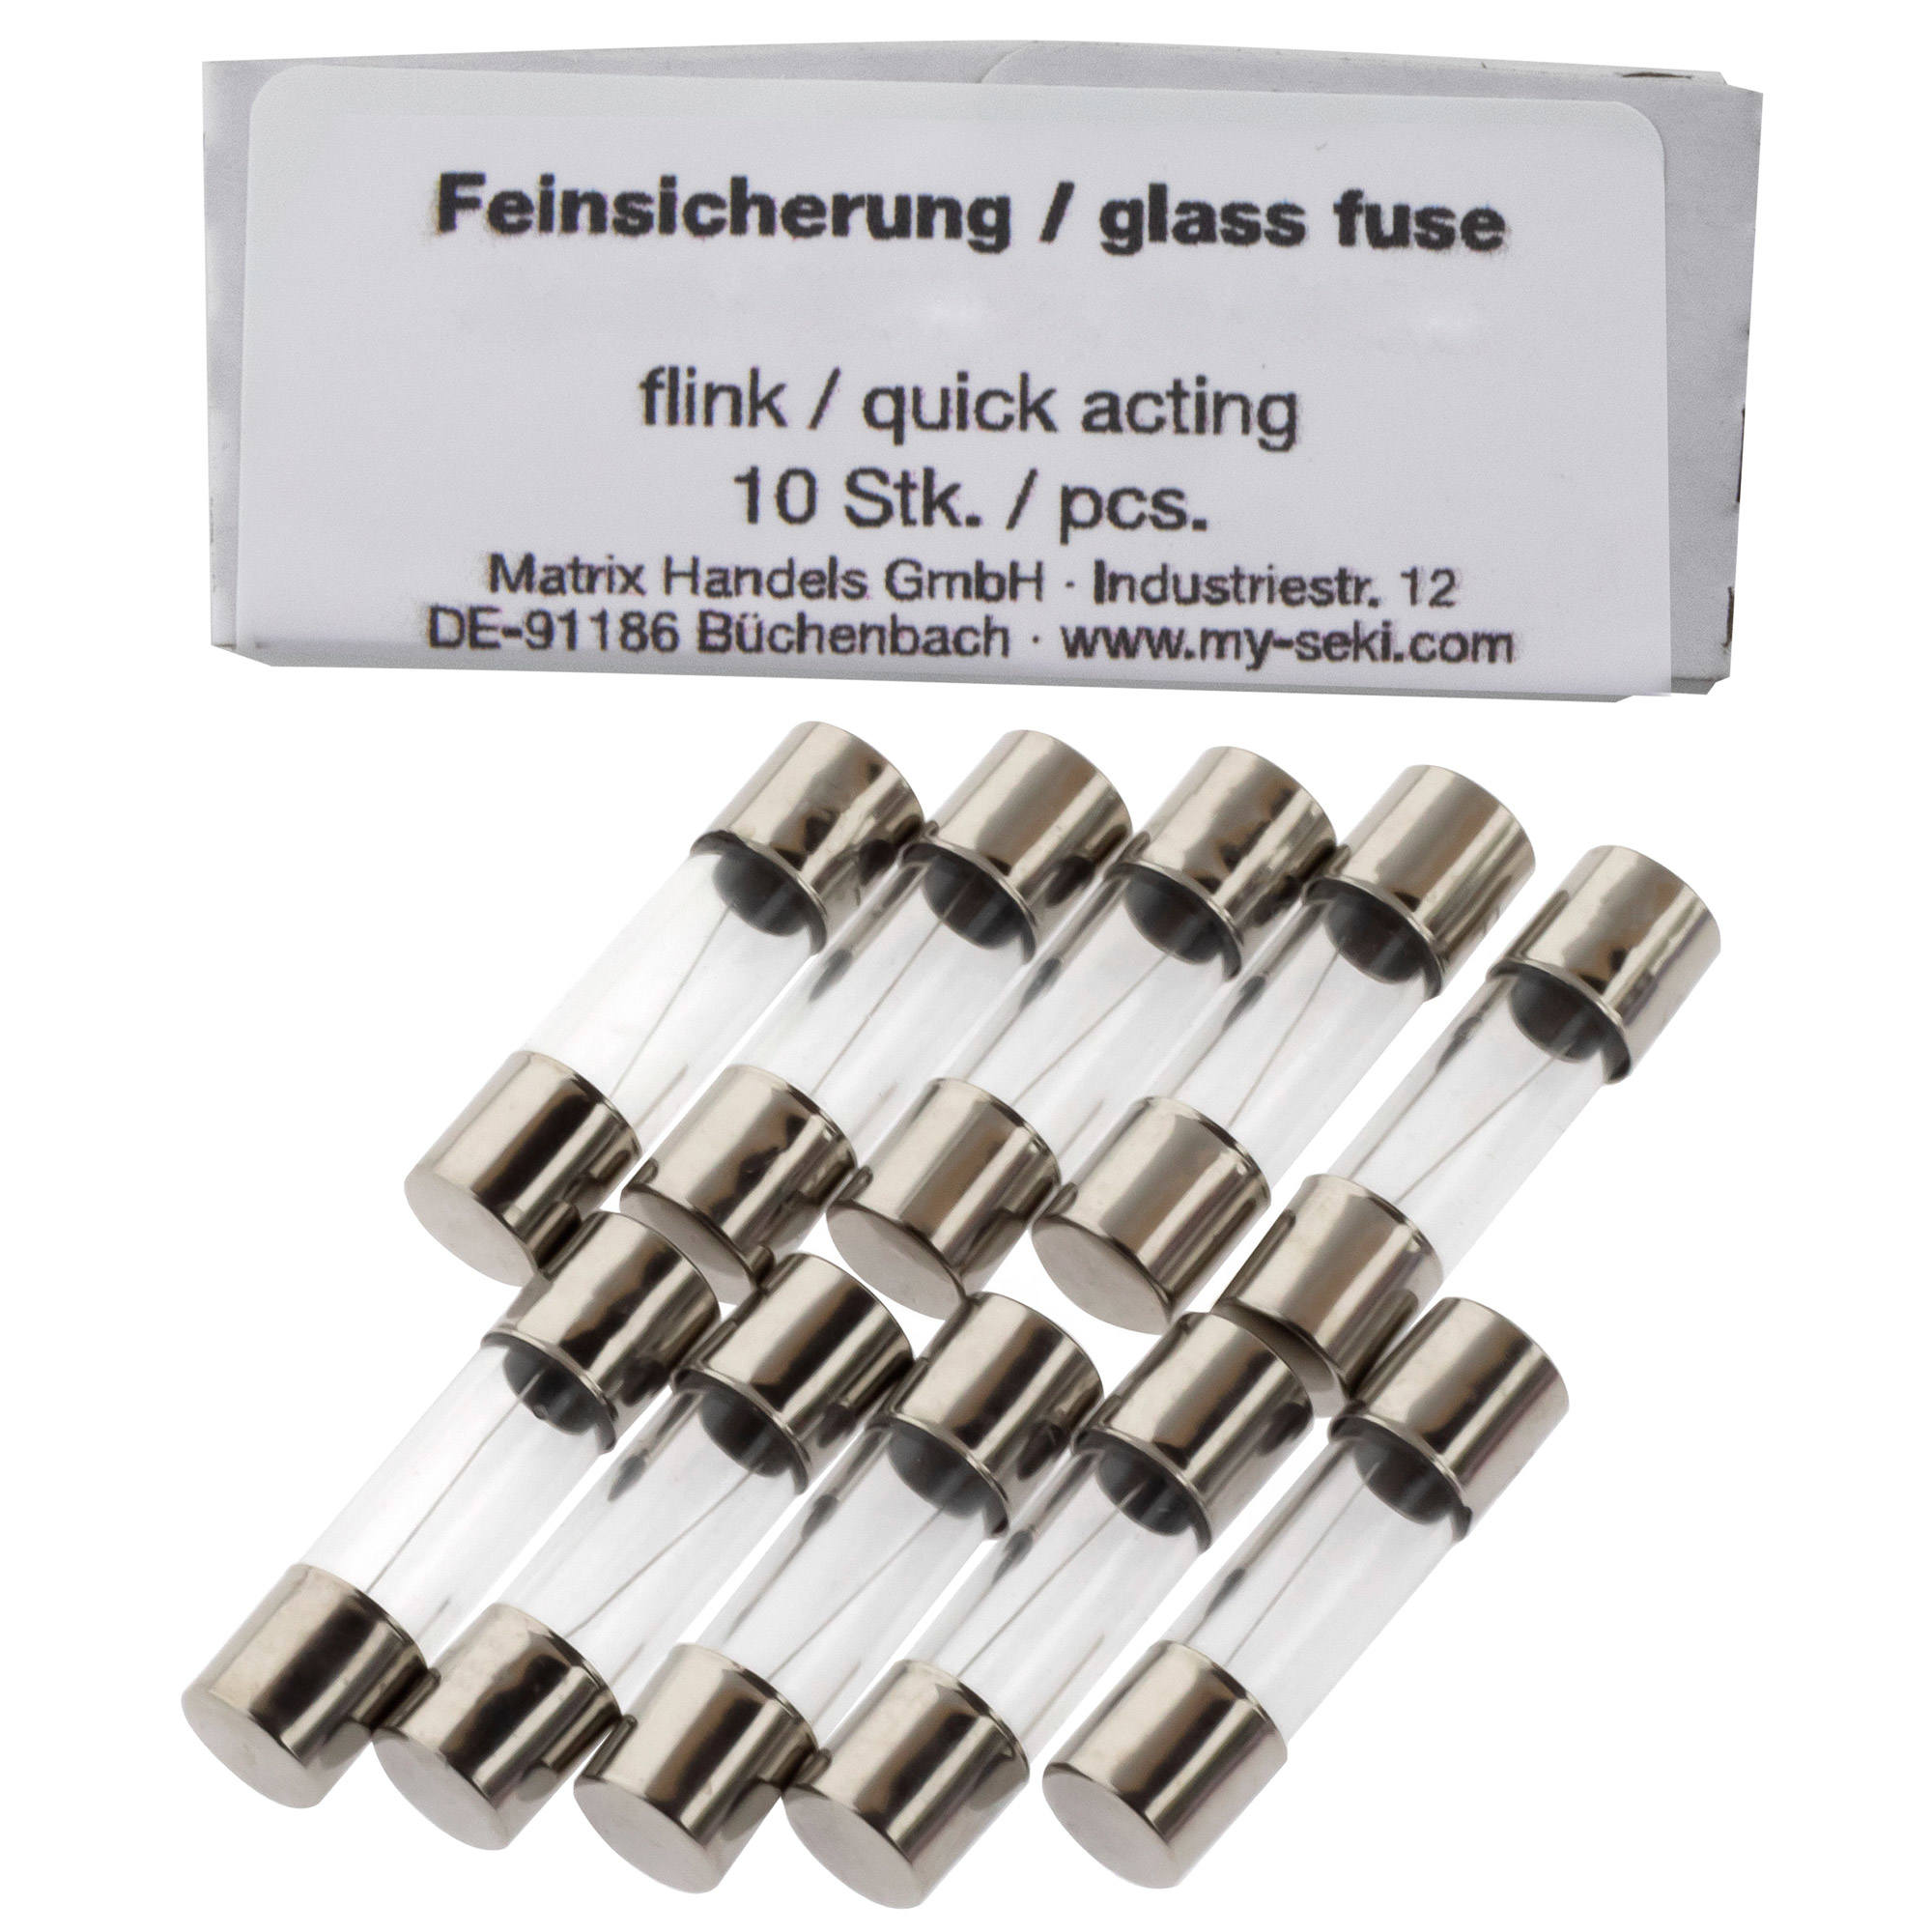 Micro Fuse 0,8A (800mA), 5x20mm, quick acting